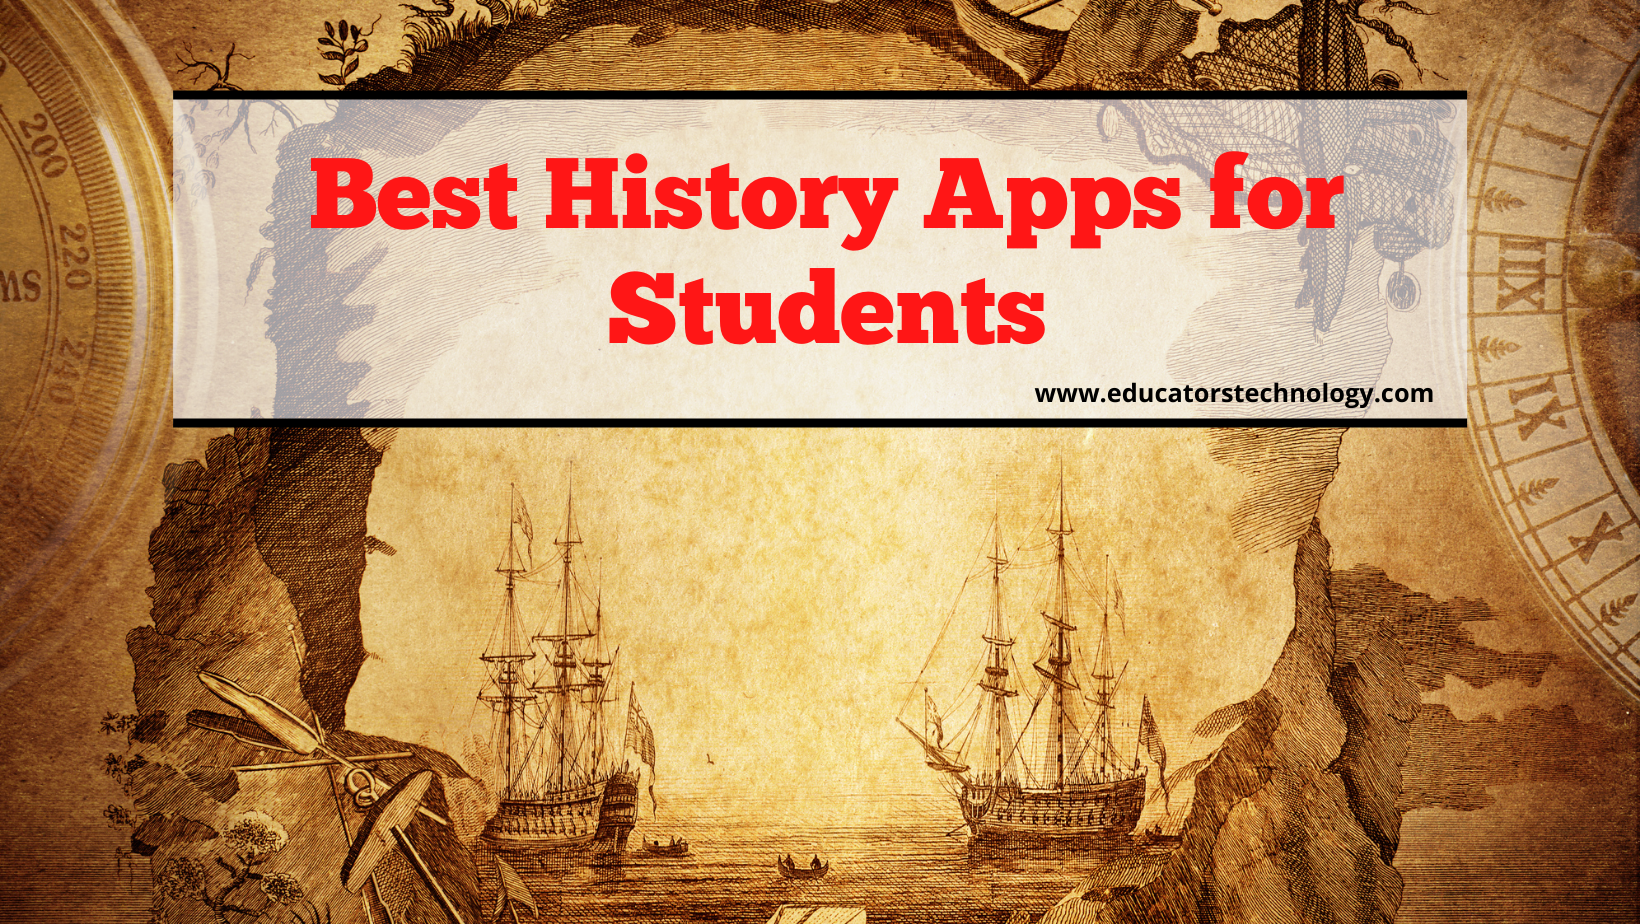 History apps for students